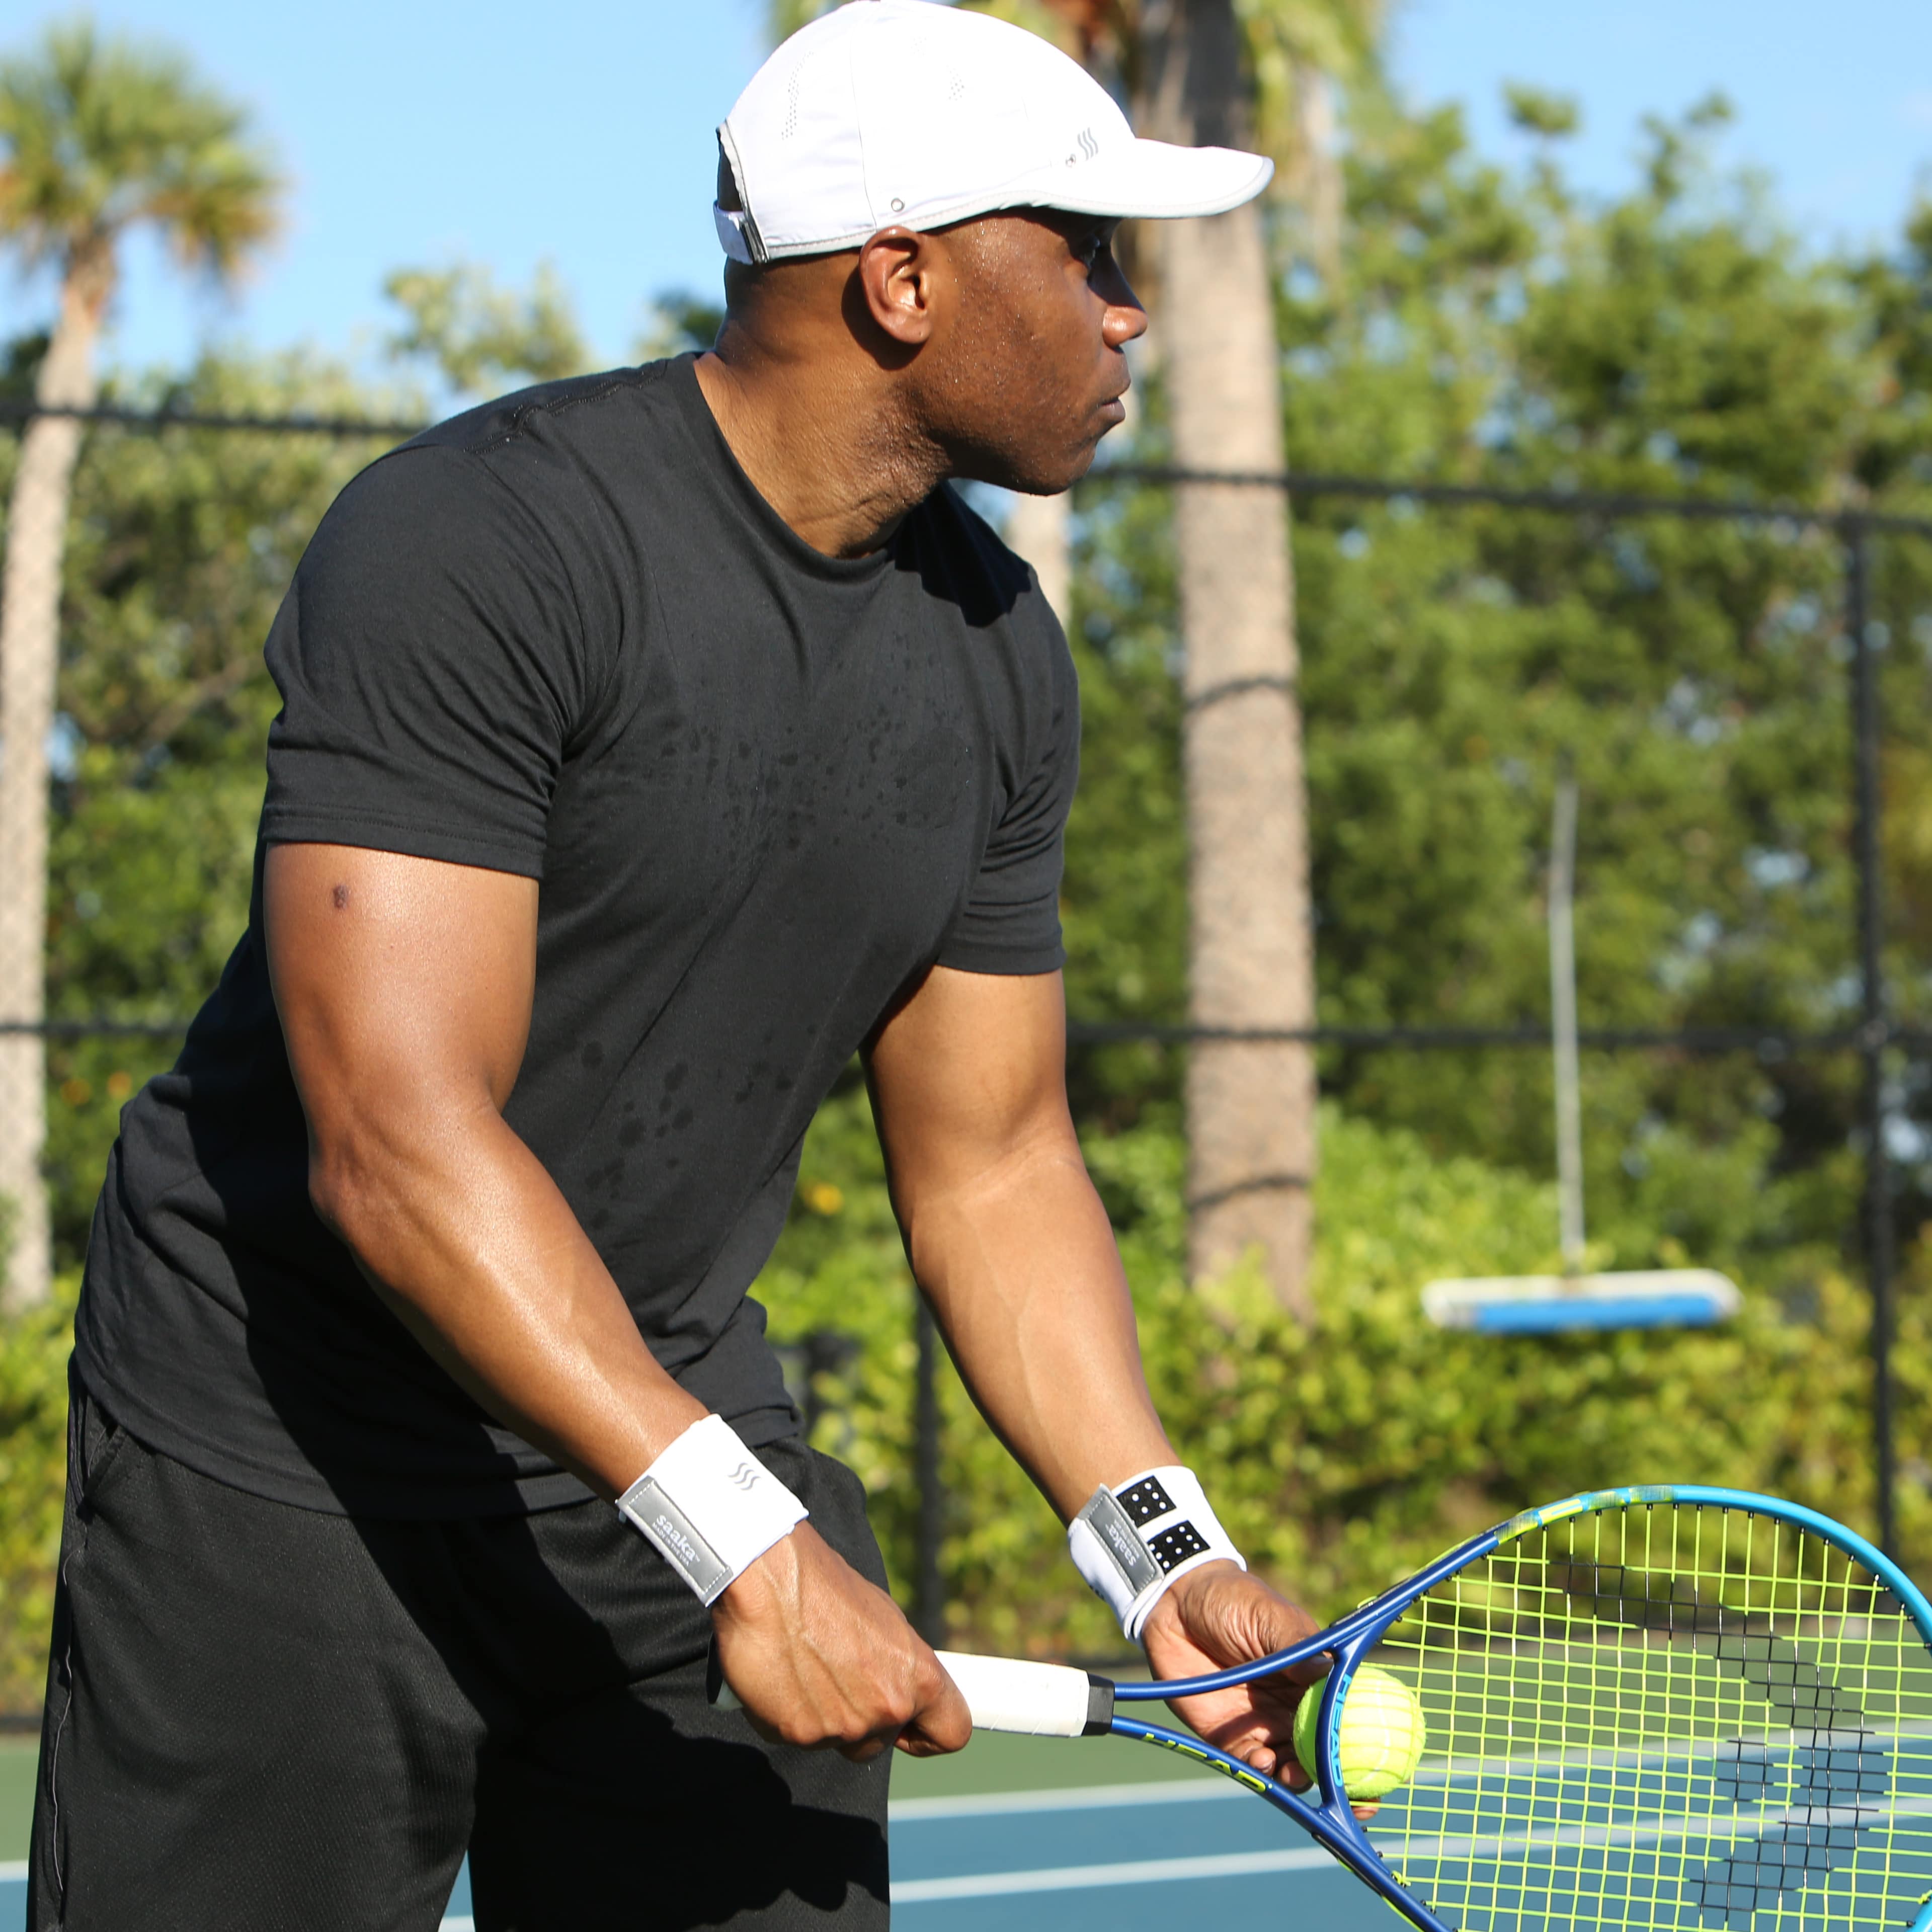 Guy playing tennis in a white hat.